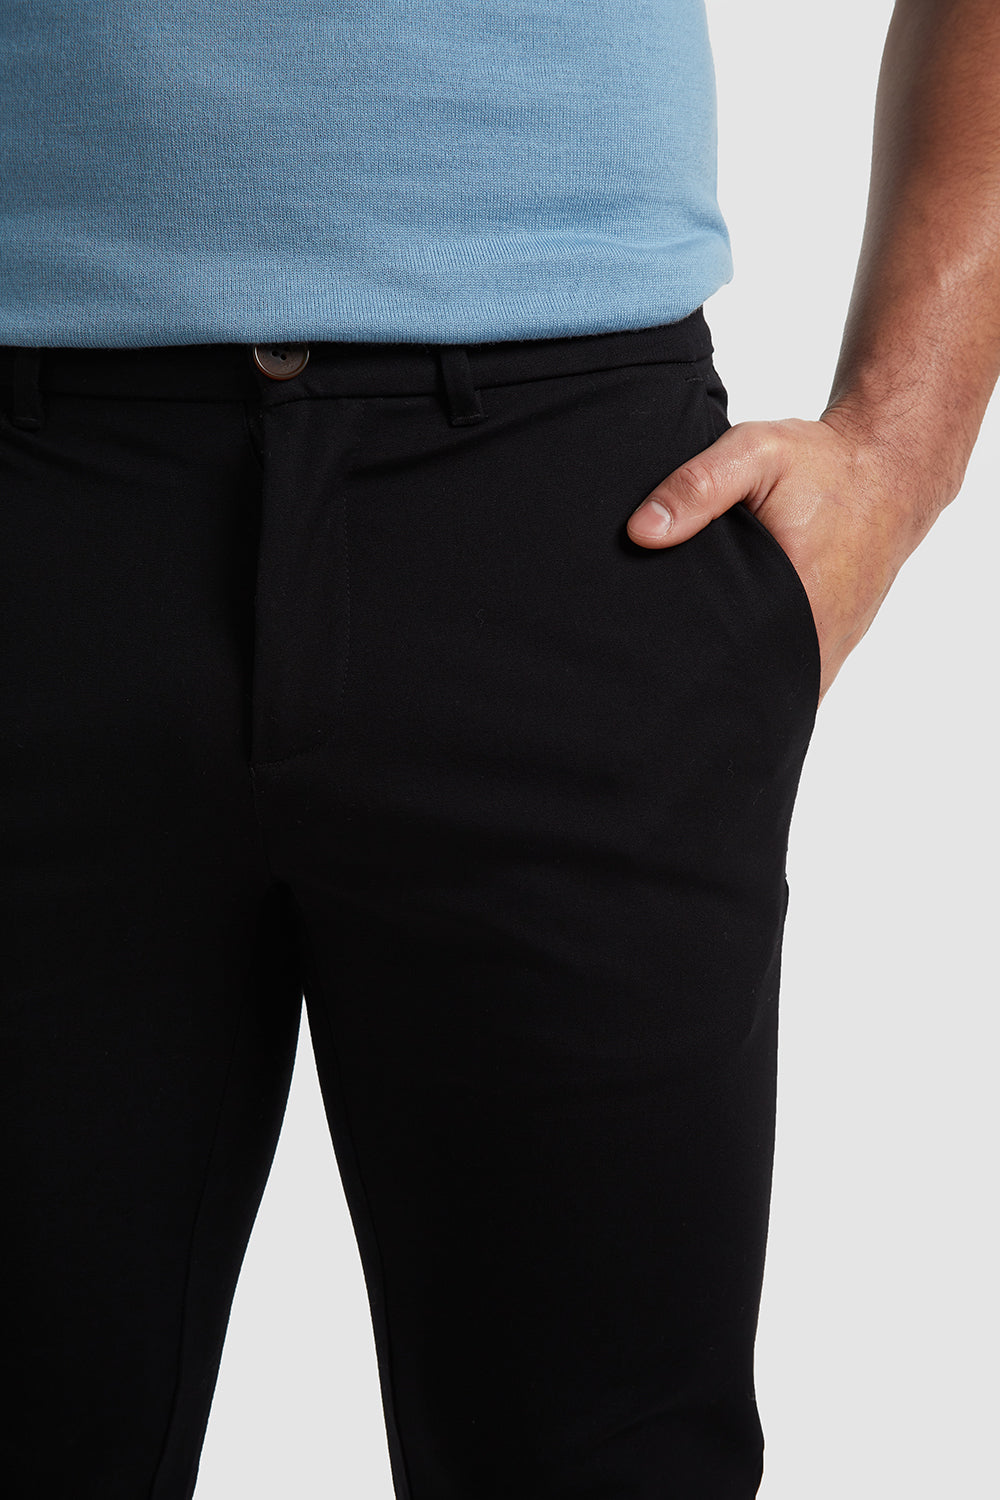 USA ATHLETE - Chino TAILORED in - Black Pants